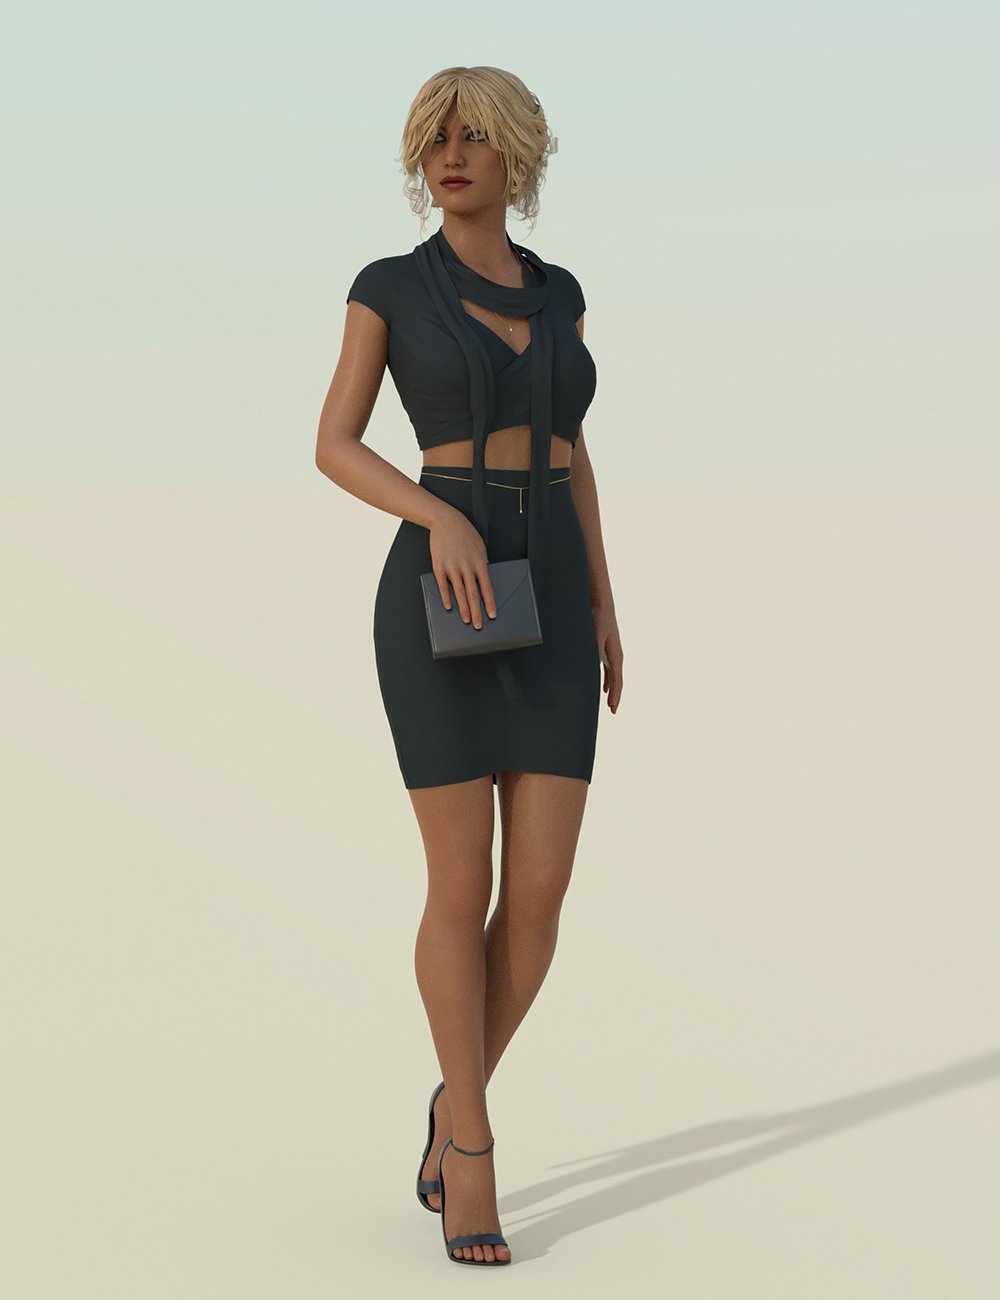 dForce Fashion Chic Outfit for Genesis 8 Female(s) by: Sixus1 Media, 3D Models by Daz 3D